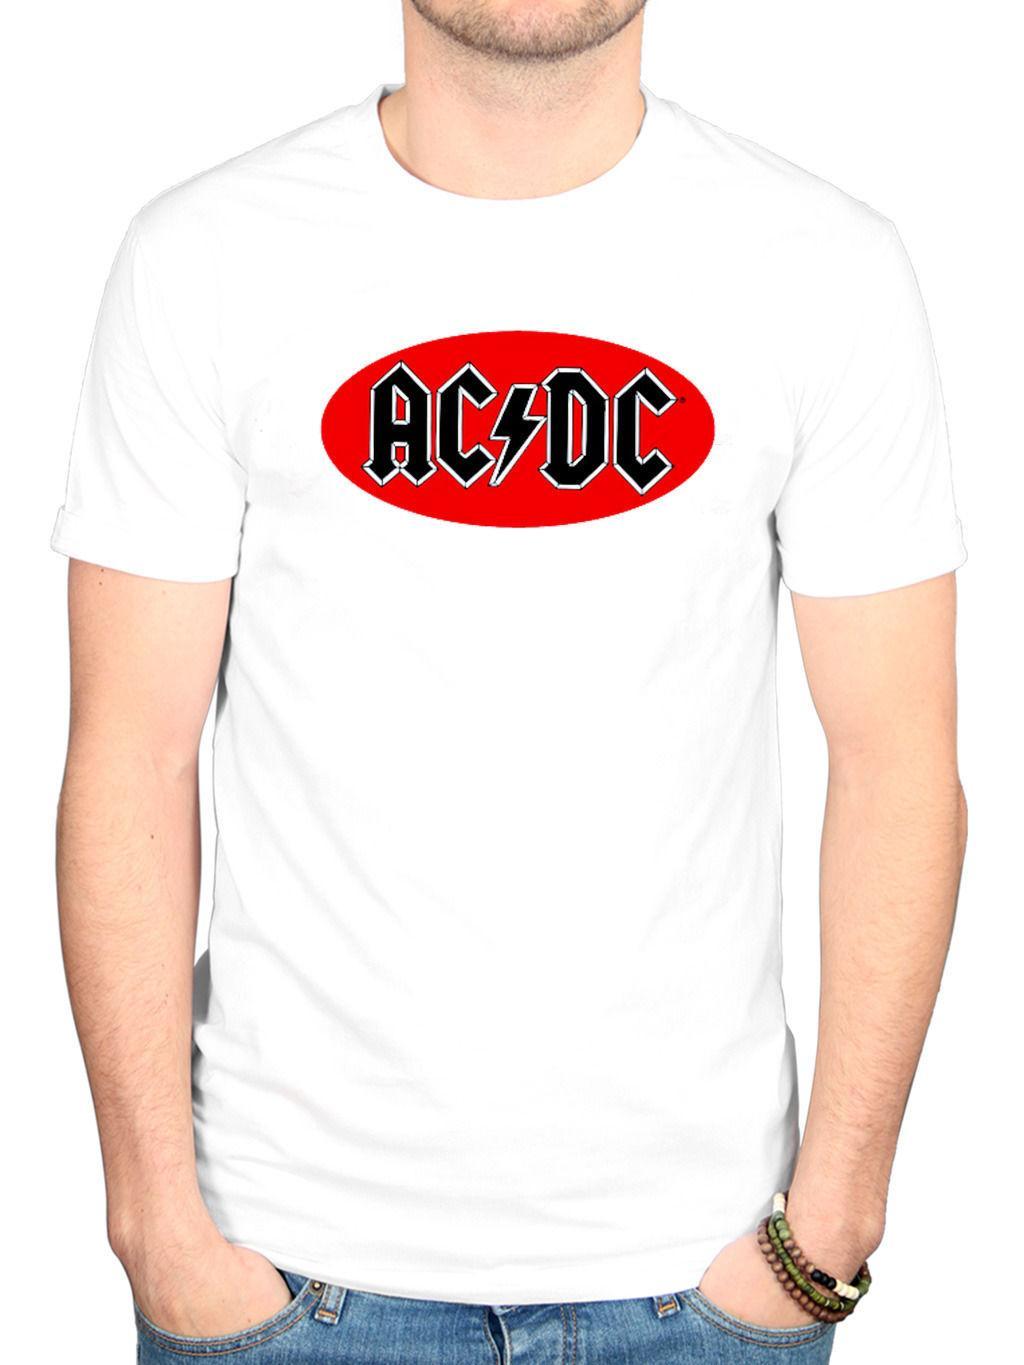 Three Oval Logo - Official AC DC Oval Logo T Shirt Back In Black Album Rock Highway To